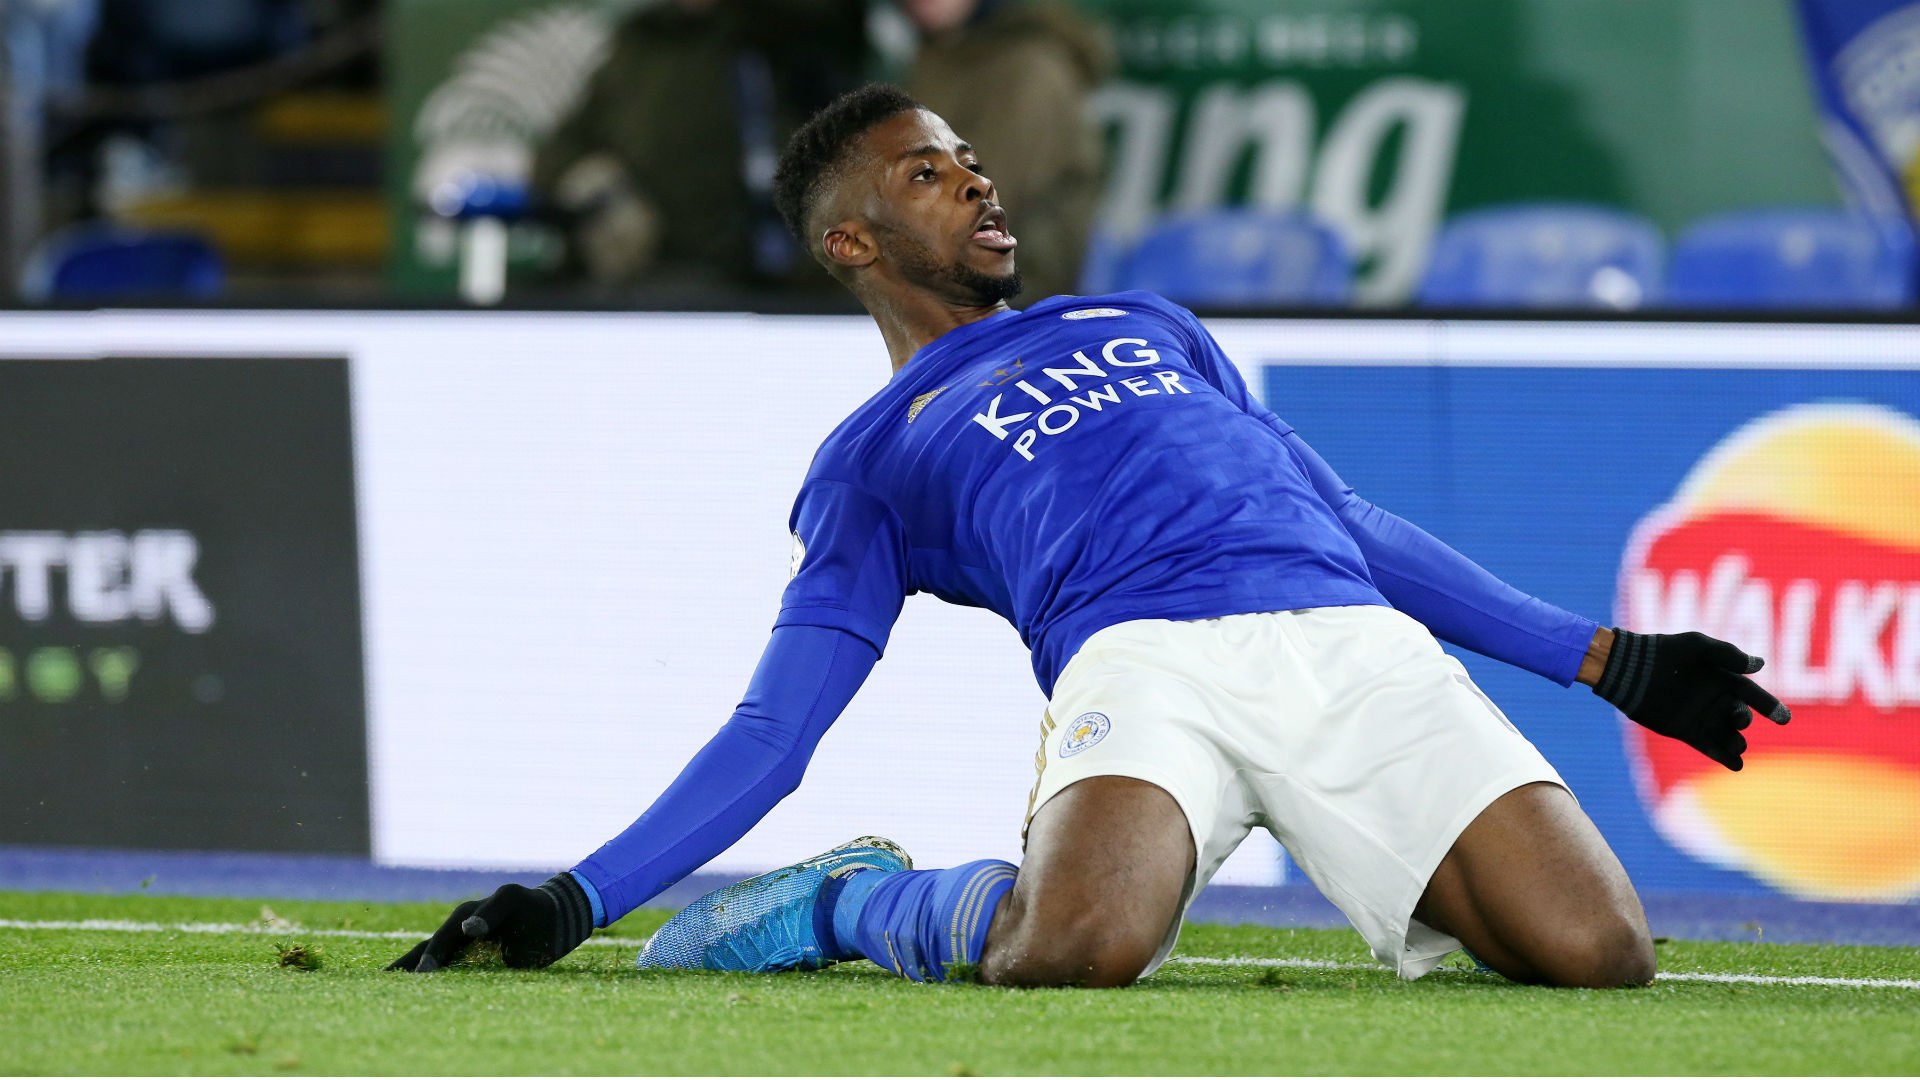 Zorya – Leicester : Iheanacho, Ndidi titulaires, les compos officielles